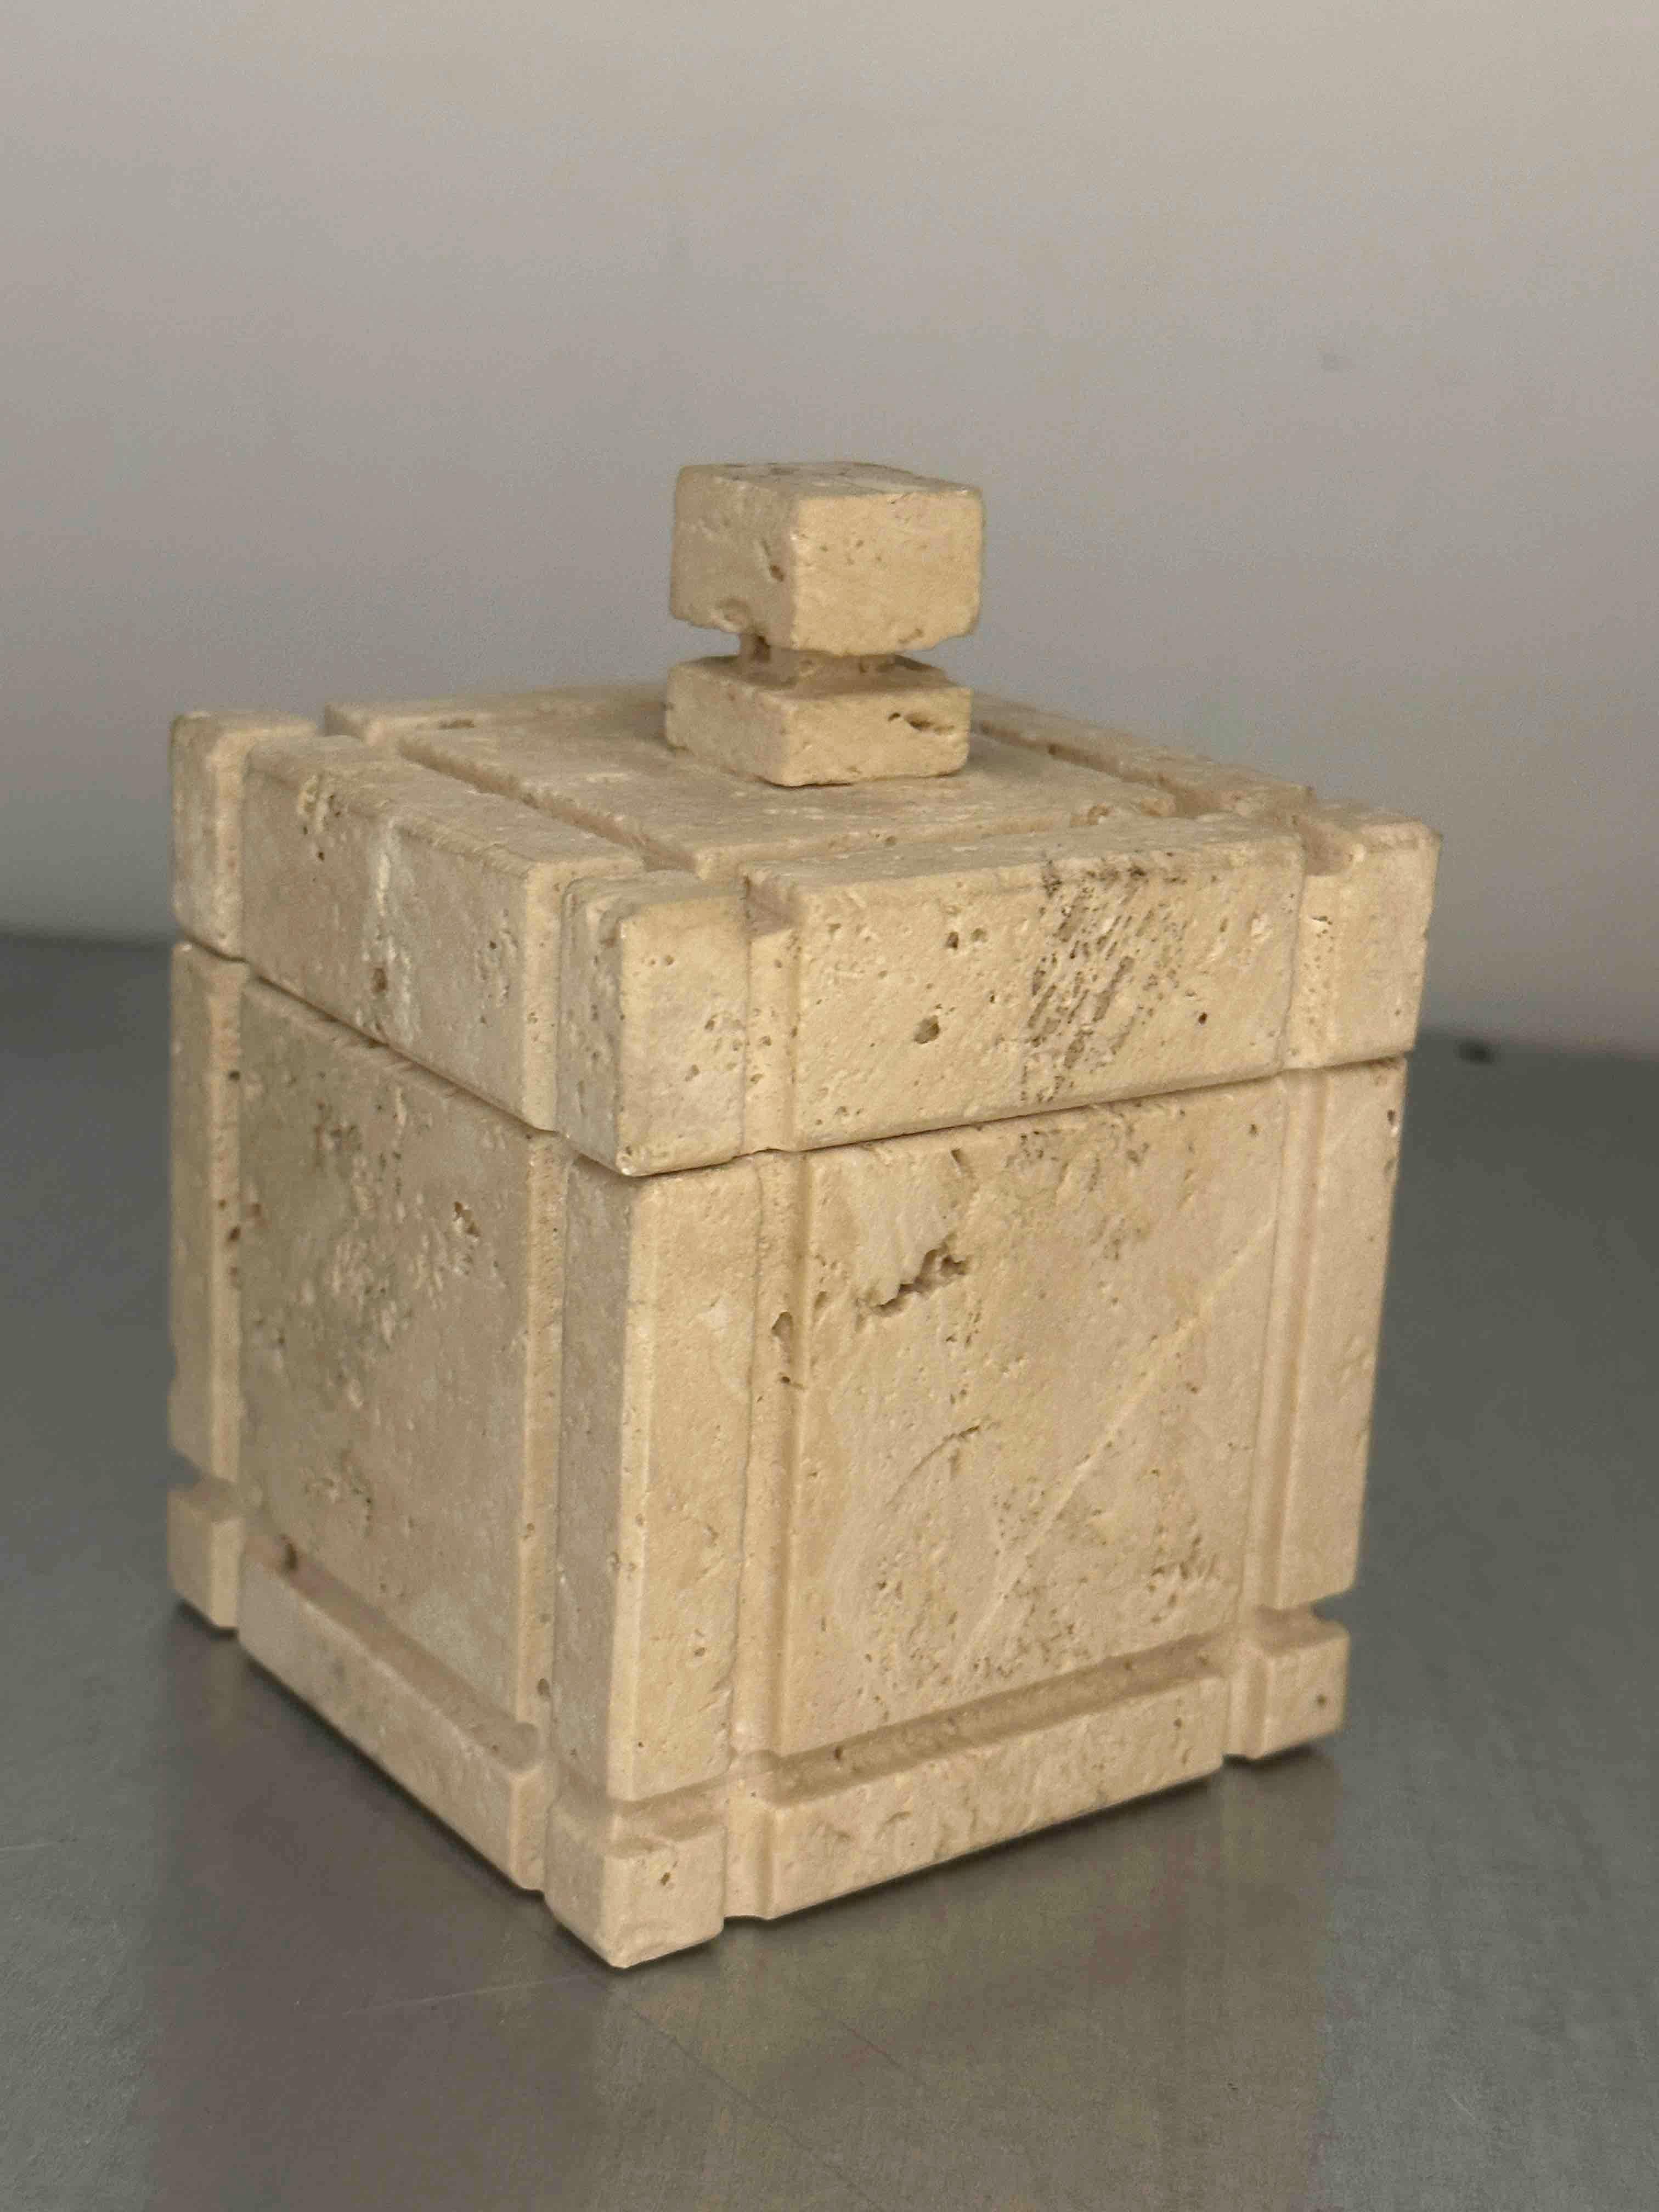 Midcentury Travertine Marble Italian Box Catchall by Fratelli Manelli, 1970s For Sale 9